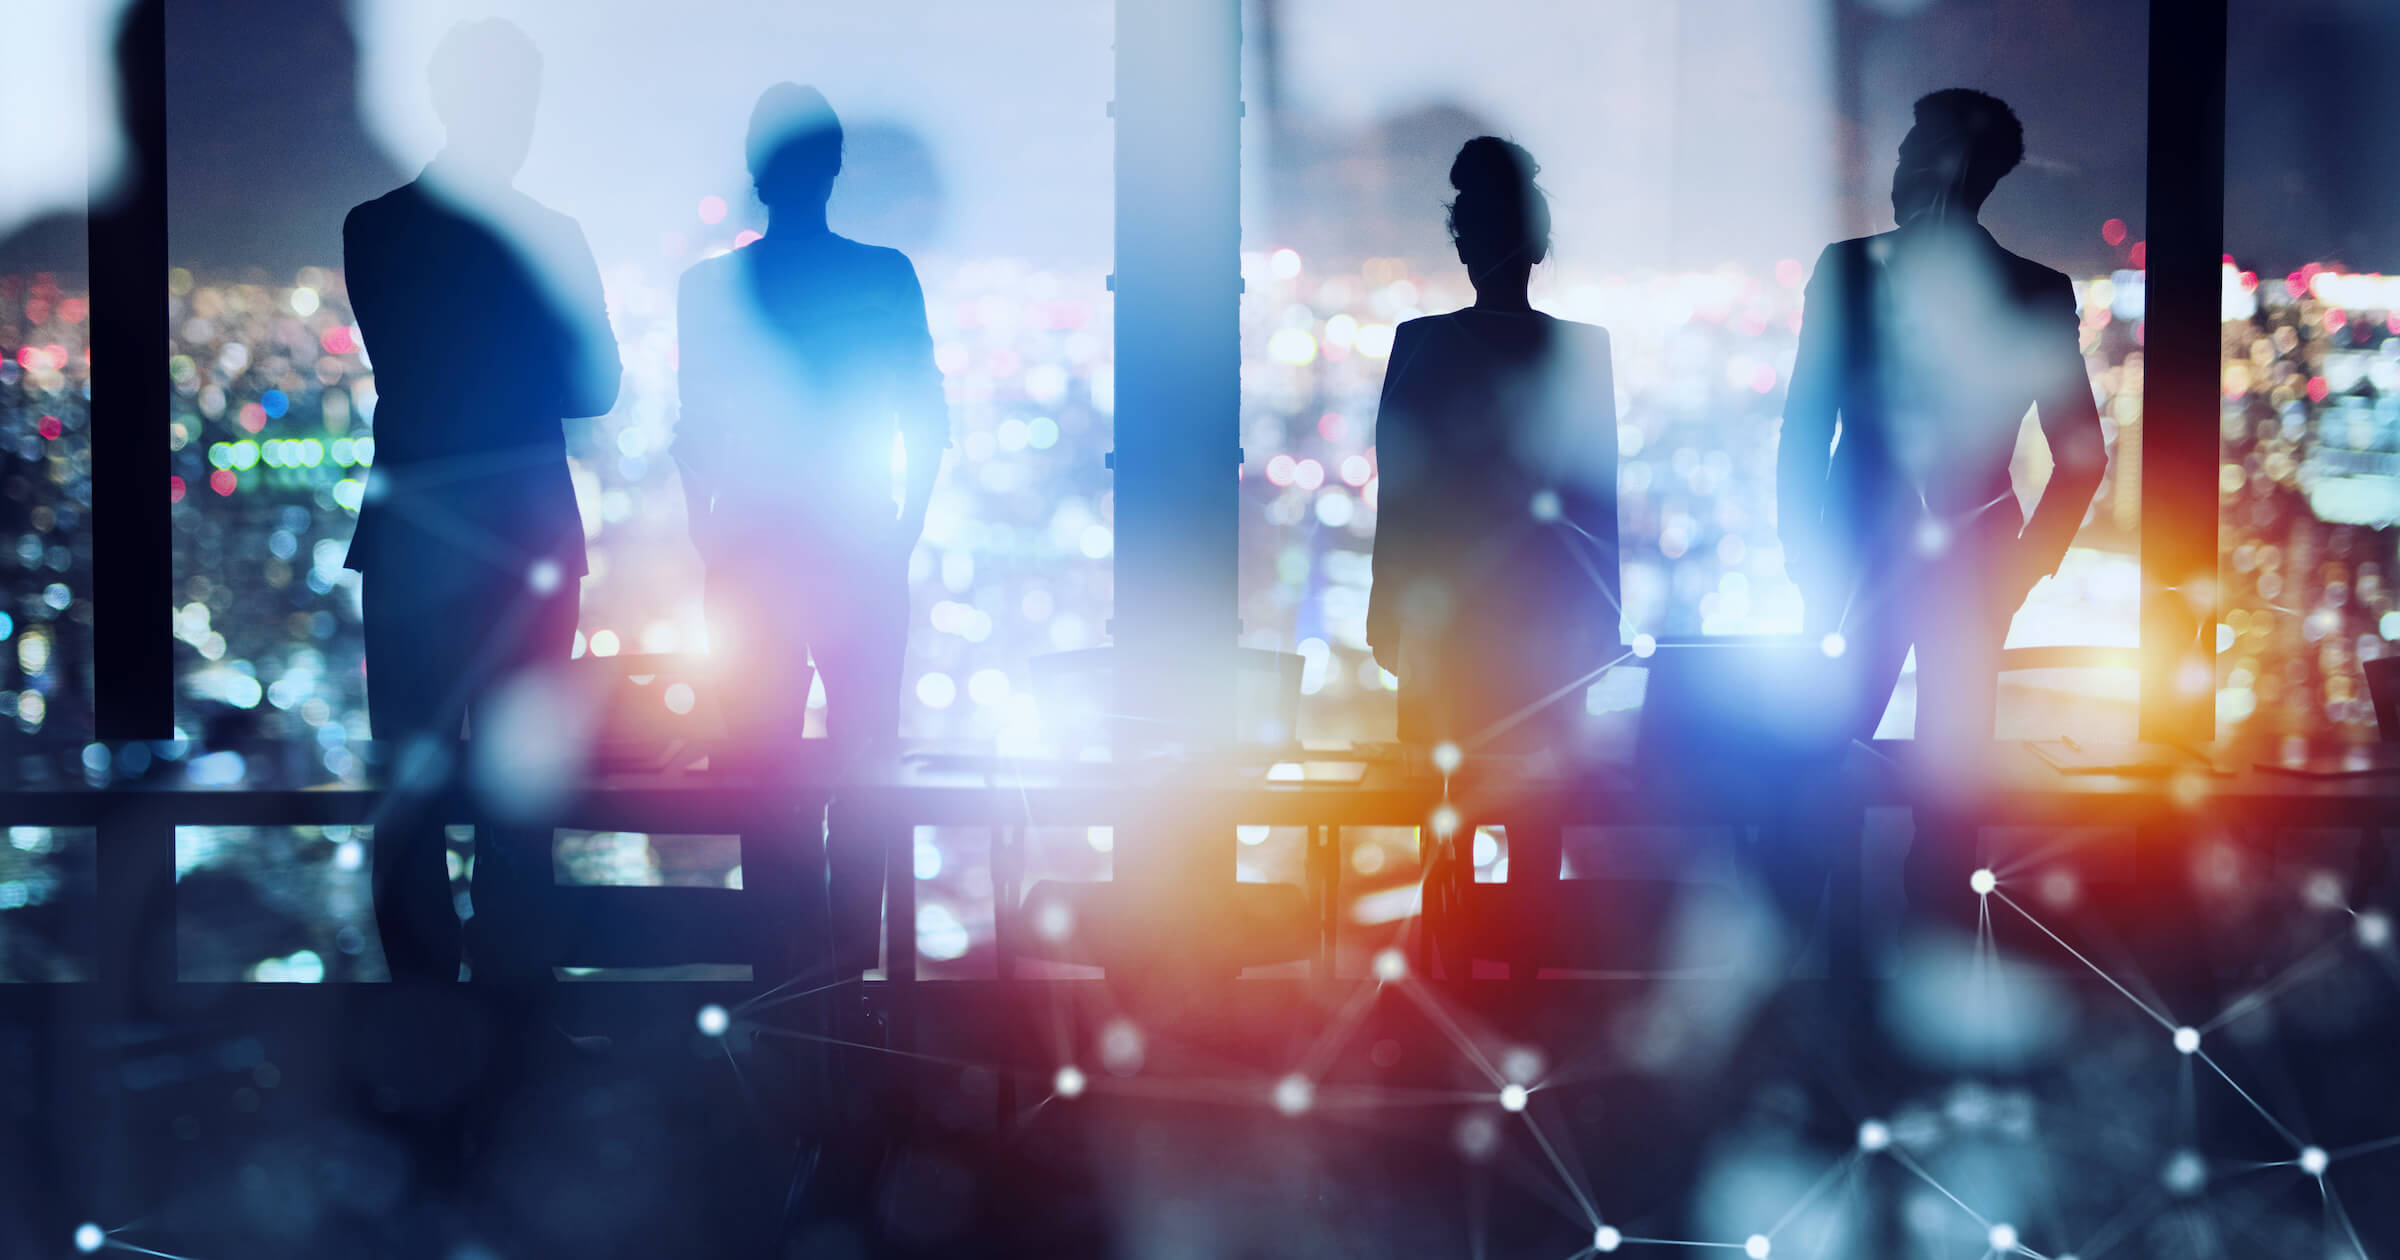 Silhouettes of 4 businesspeople looking out from a tall building in the city. Foreground sparkles.